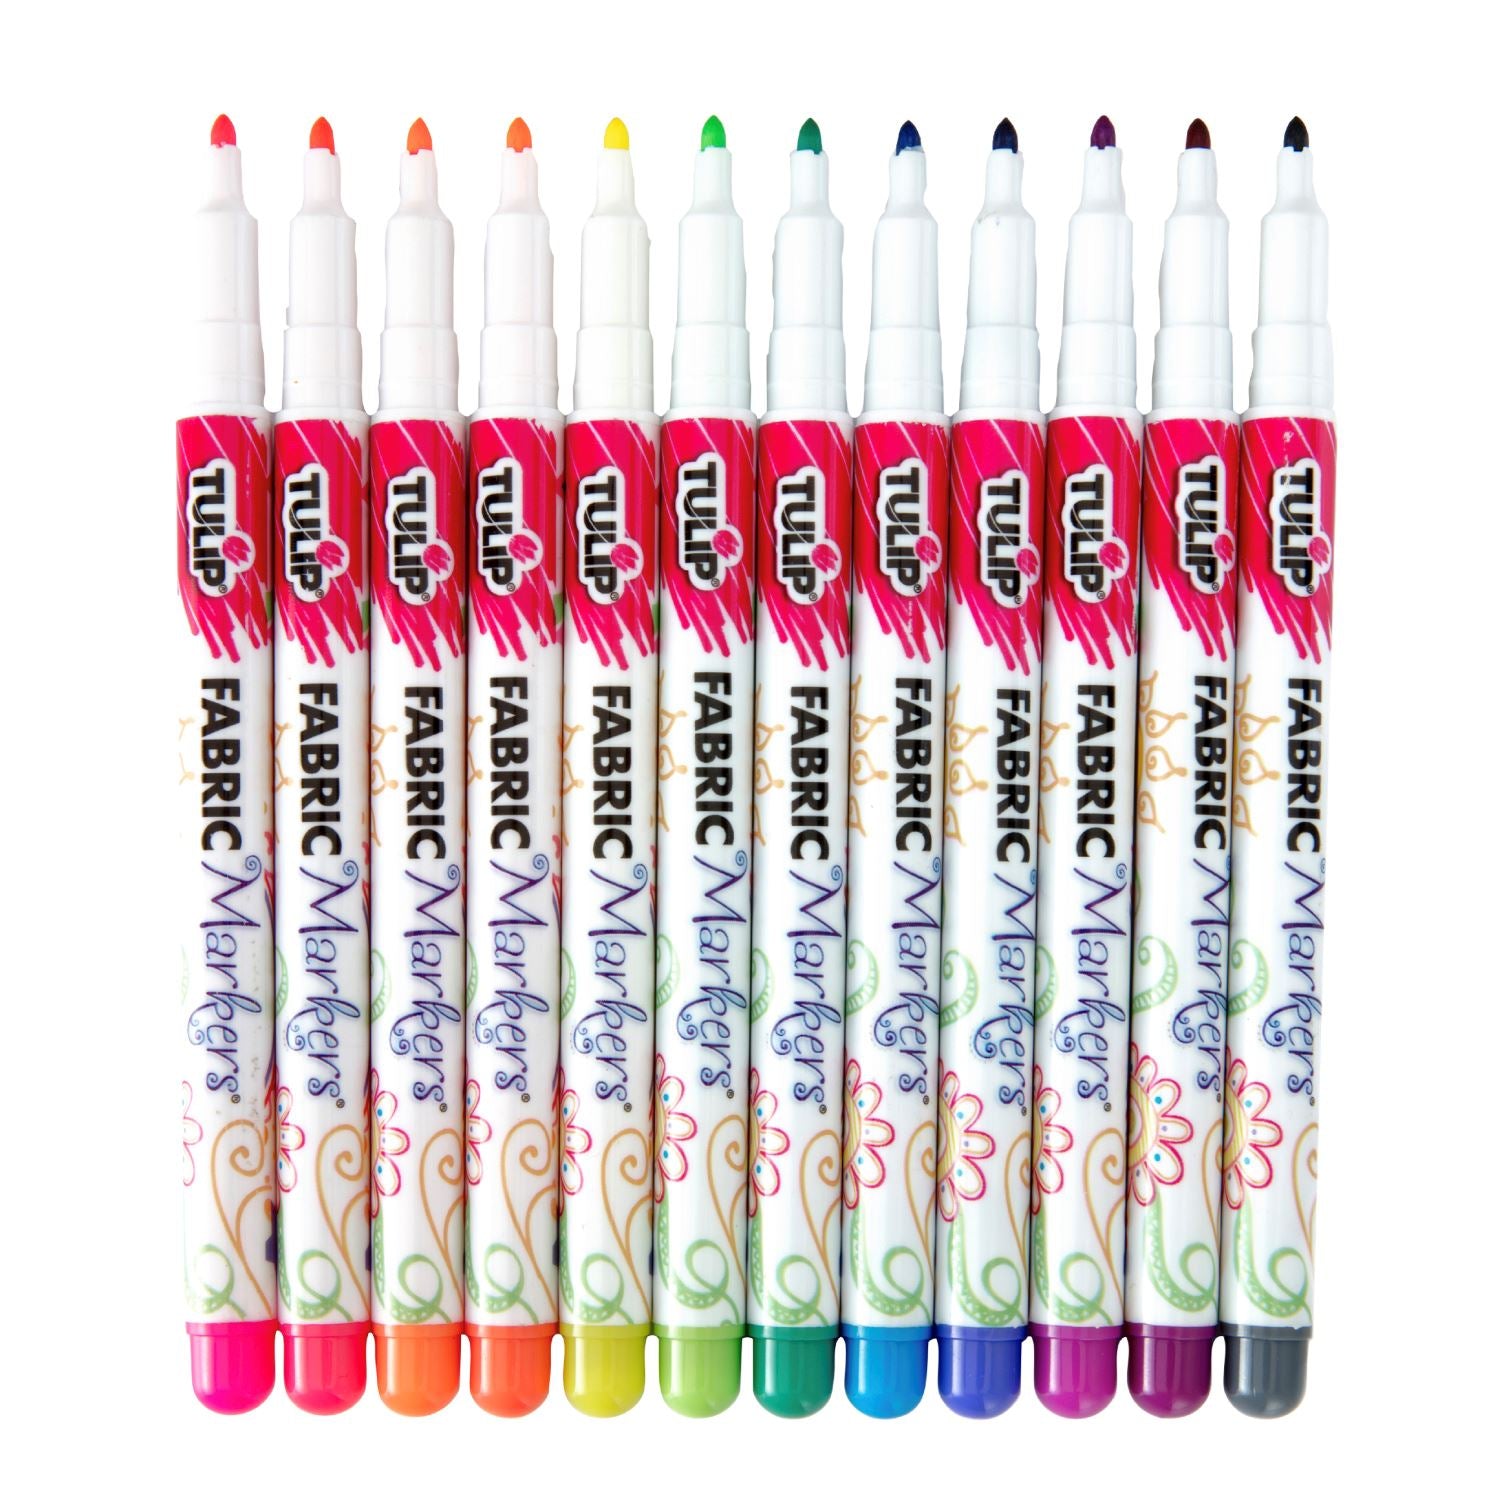 Fabric Markers Permanent 12 Pack premium quality bright dual tip